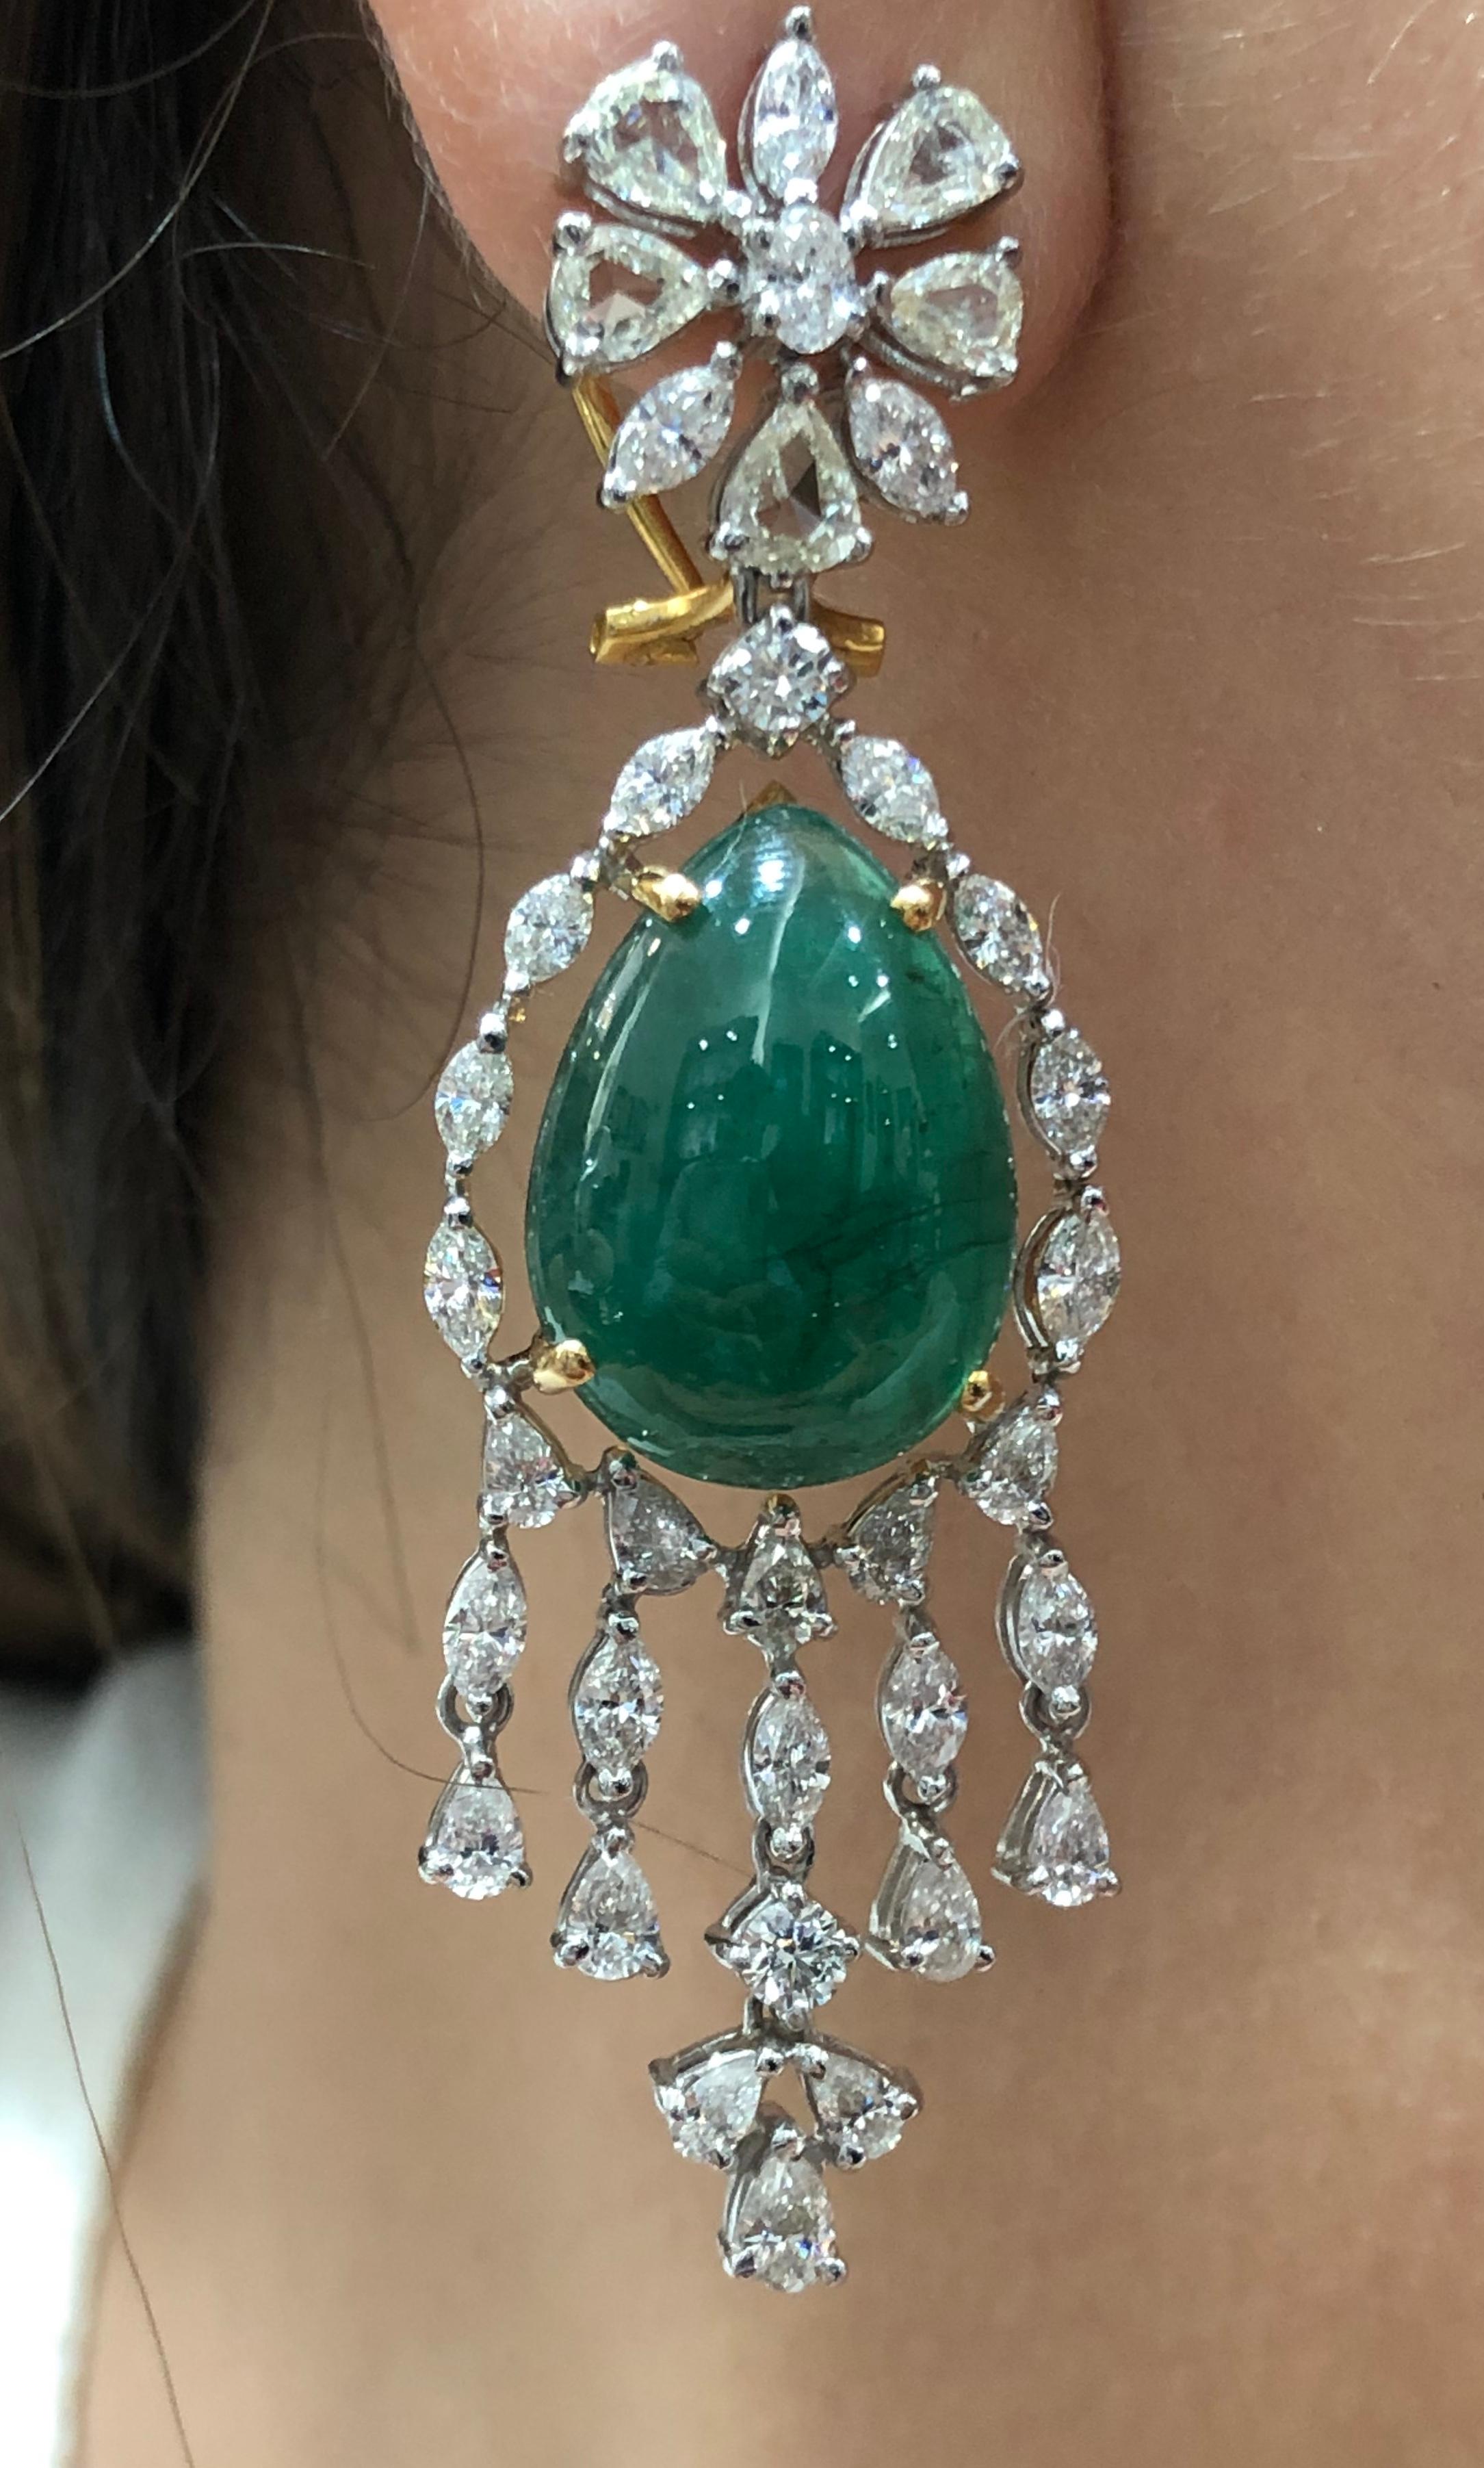 Diamonds: 7.24 carats
Emeralds: 27.35 carats
Gold: 22.010 grams
Ref No: DT - A@CD

Your are bound to shine in these beautiful pair of earrings featuring rose cut diamonds, pear, marquise and round diamonds with Zambian cabochon emeralds
